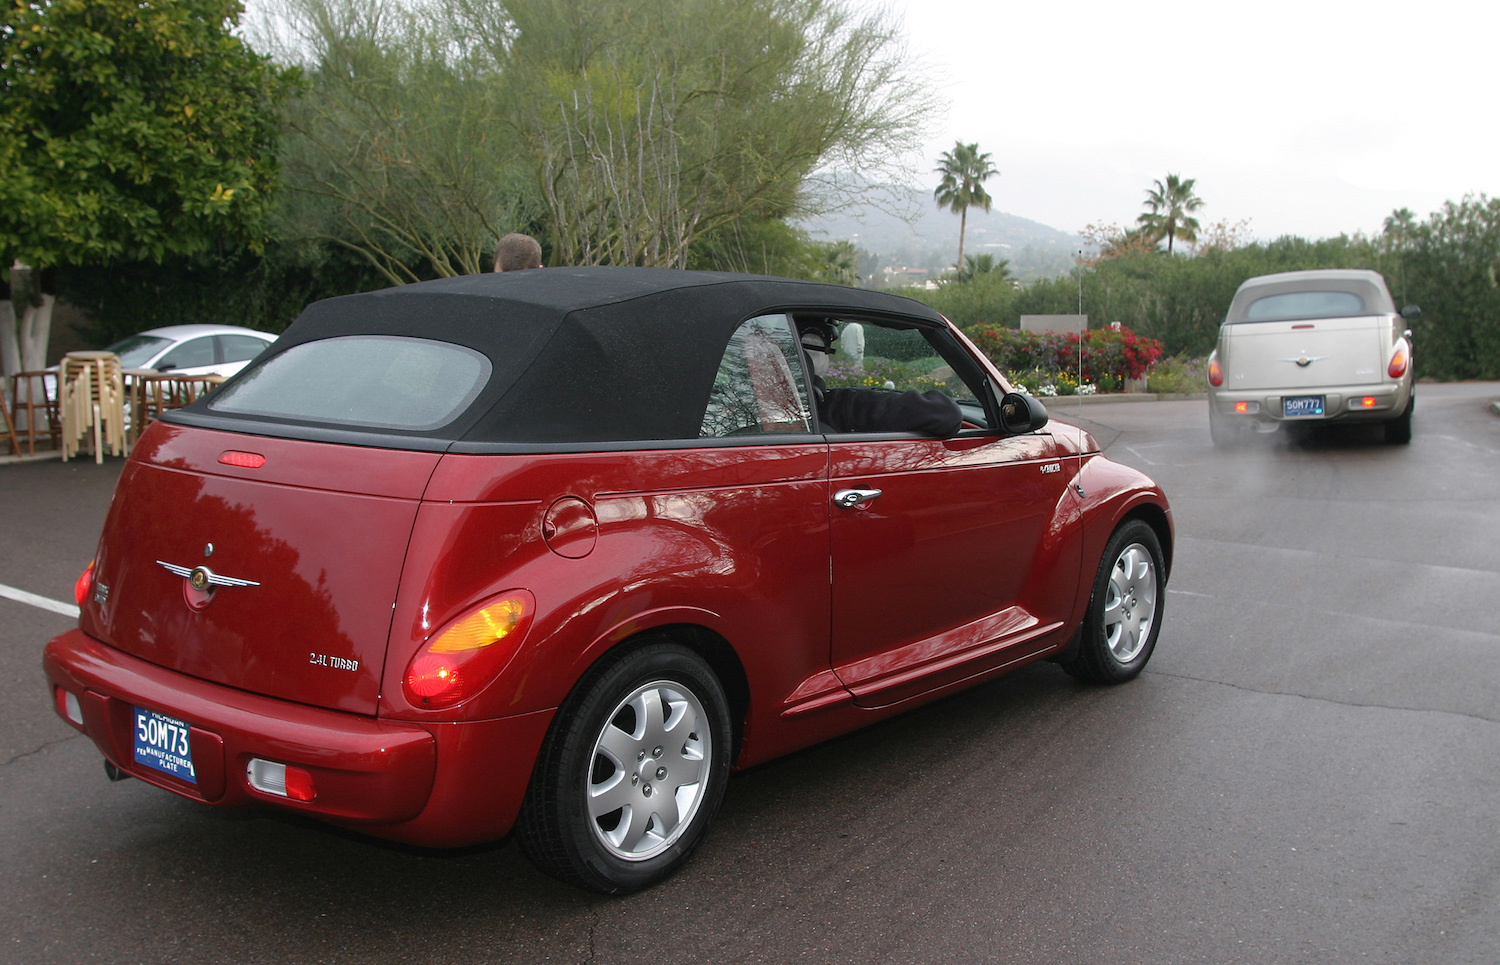 Two early convertible PT Cruisers driving away from the camera for a press event.